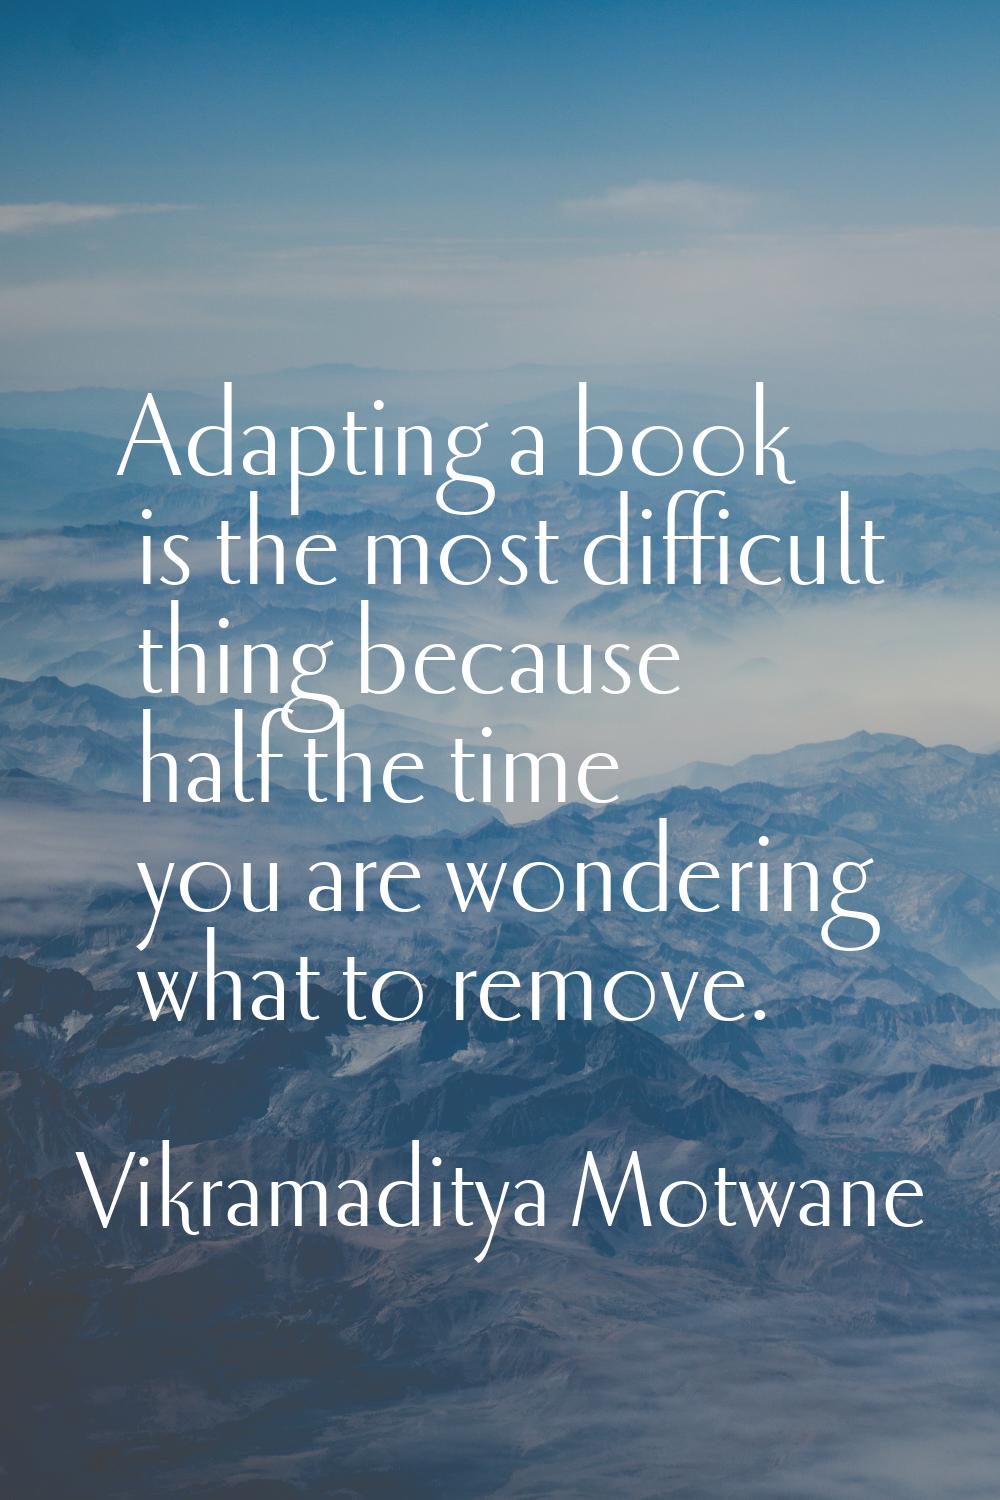 Adapting a book is the most difficult thing because half the time you are wondering what to remove.